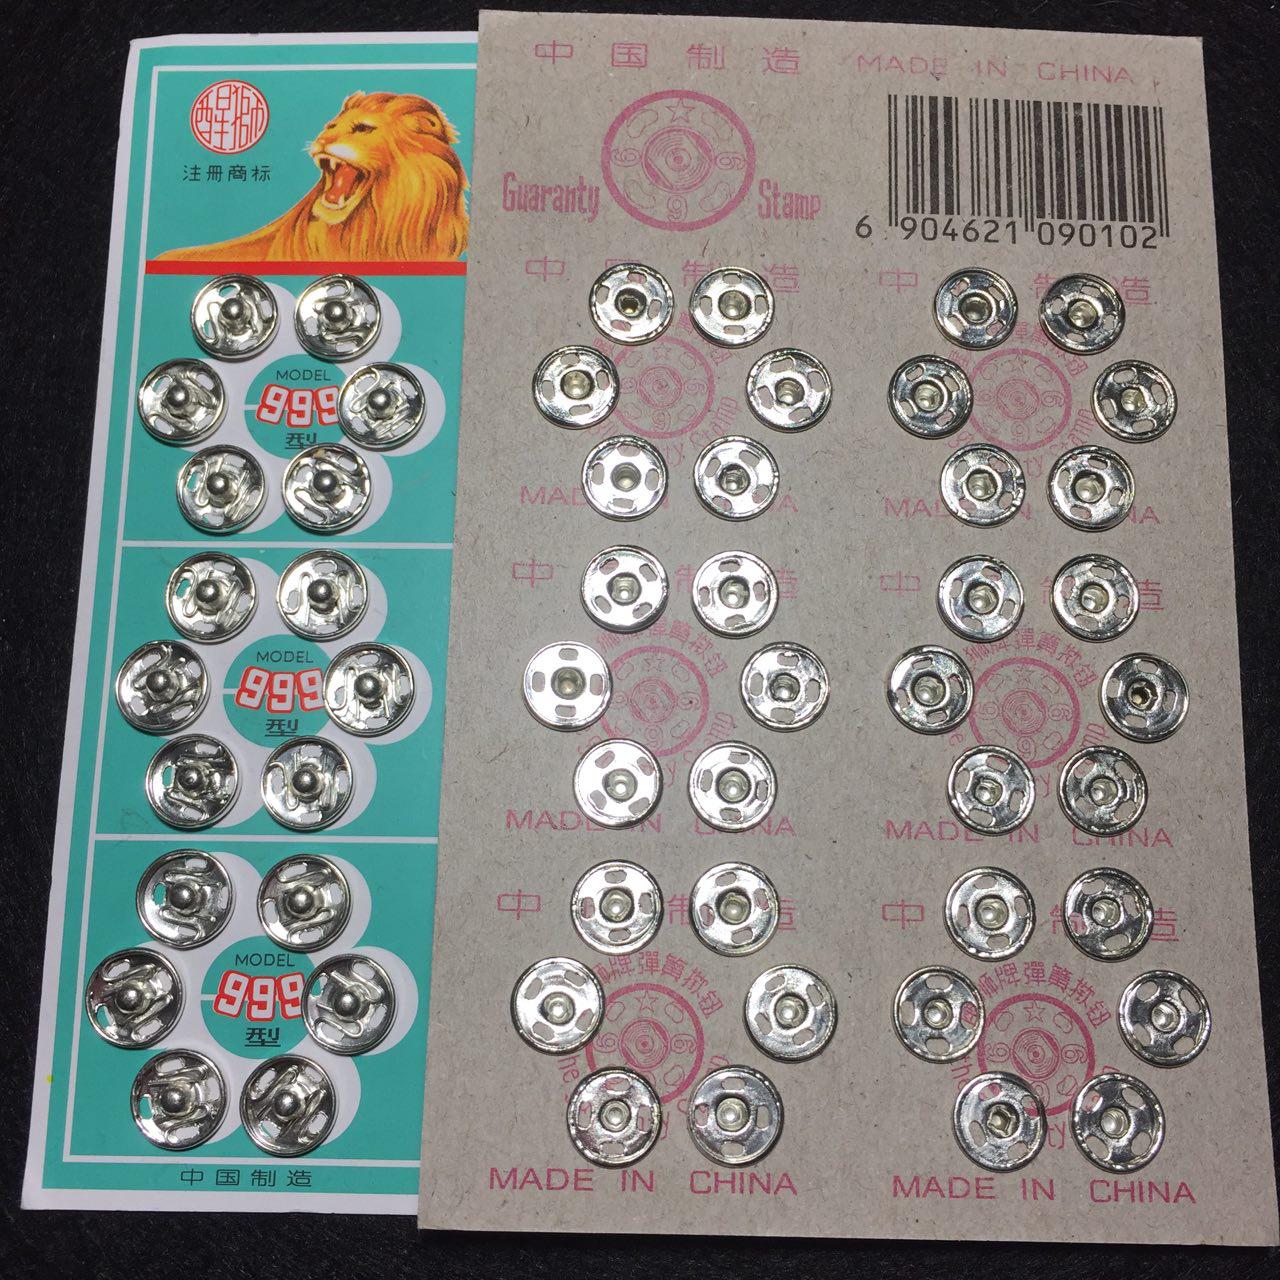 Buttons for sewing, sewing hooks